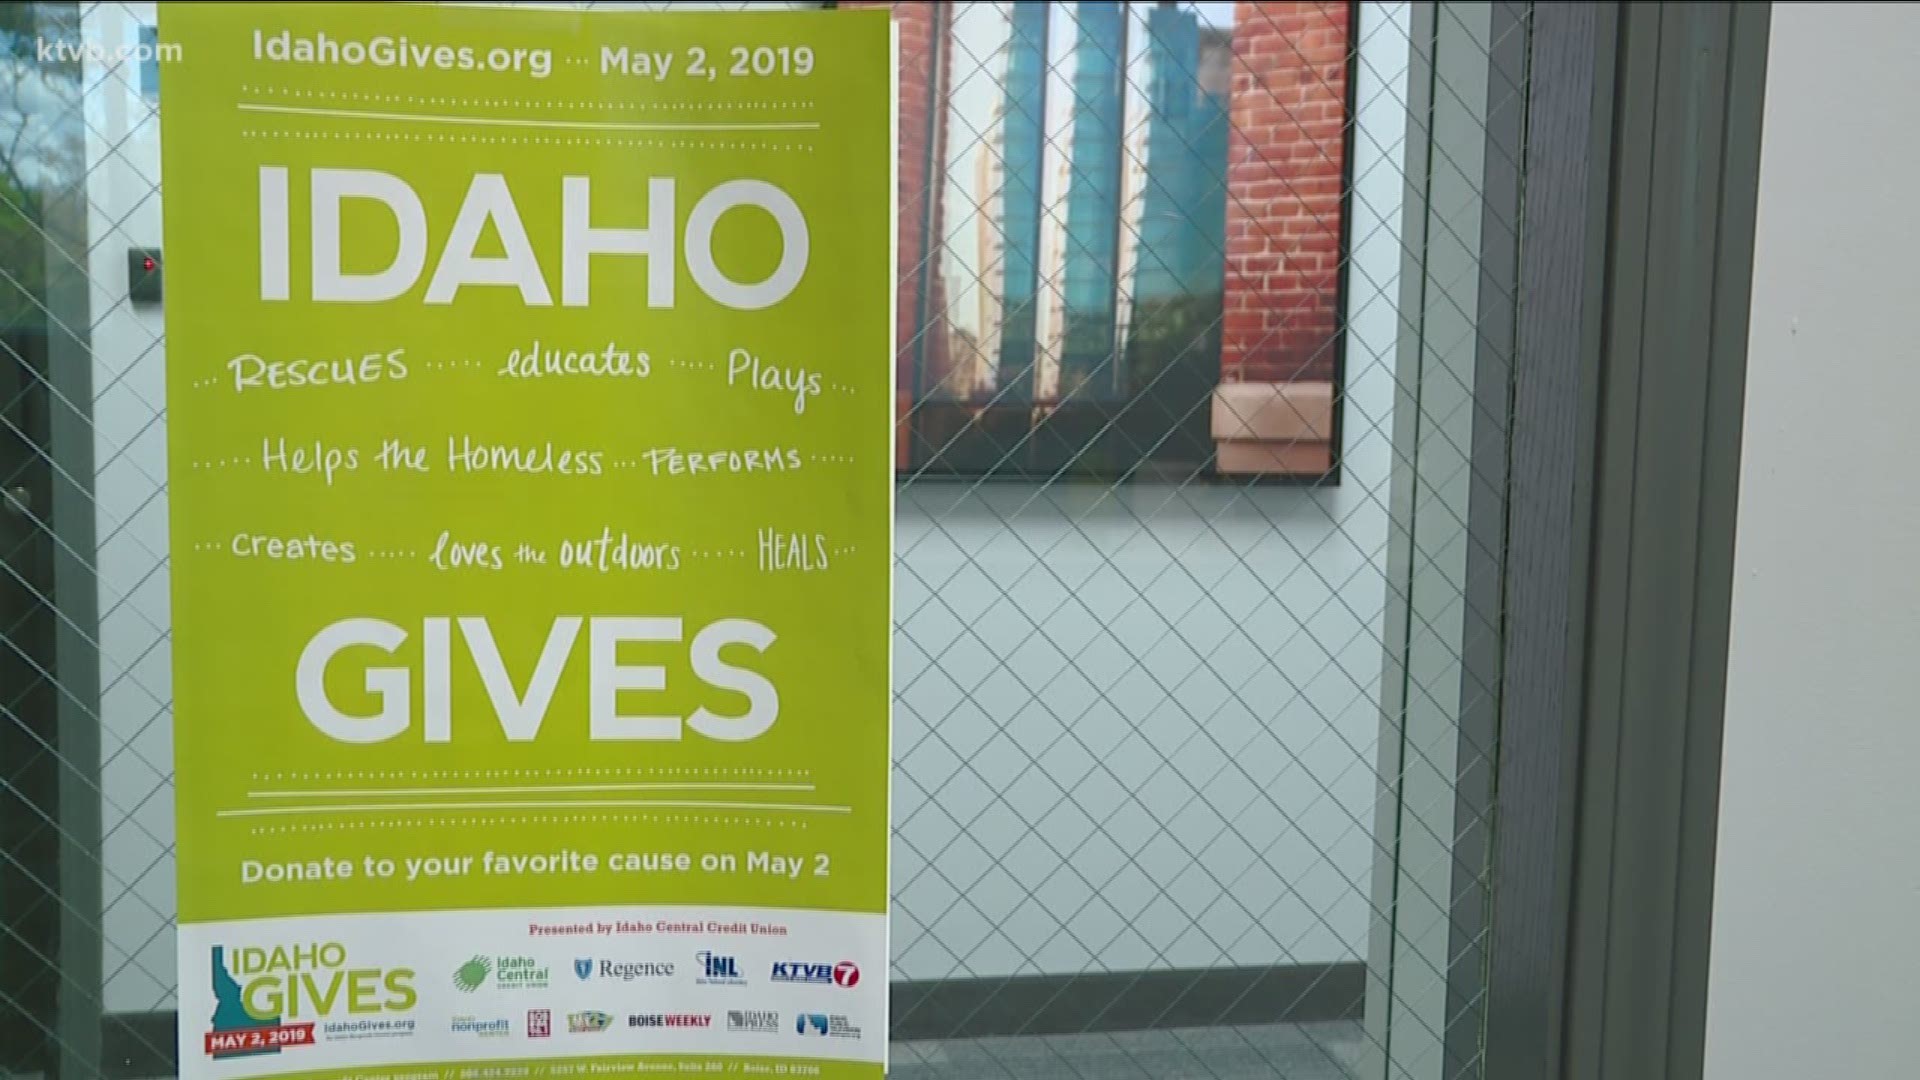 Now in its seventh year, Idaho Gives is hoping to raise $1.7 million for Idaho nonprofits on Thursday, May 2, 2019.